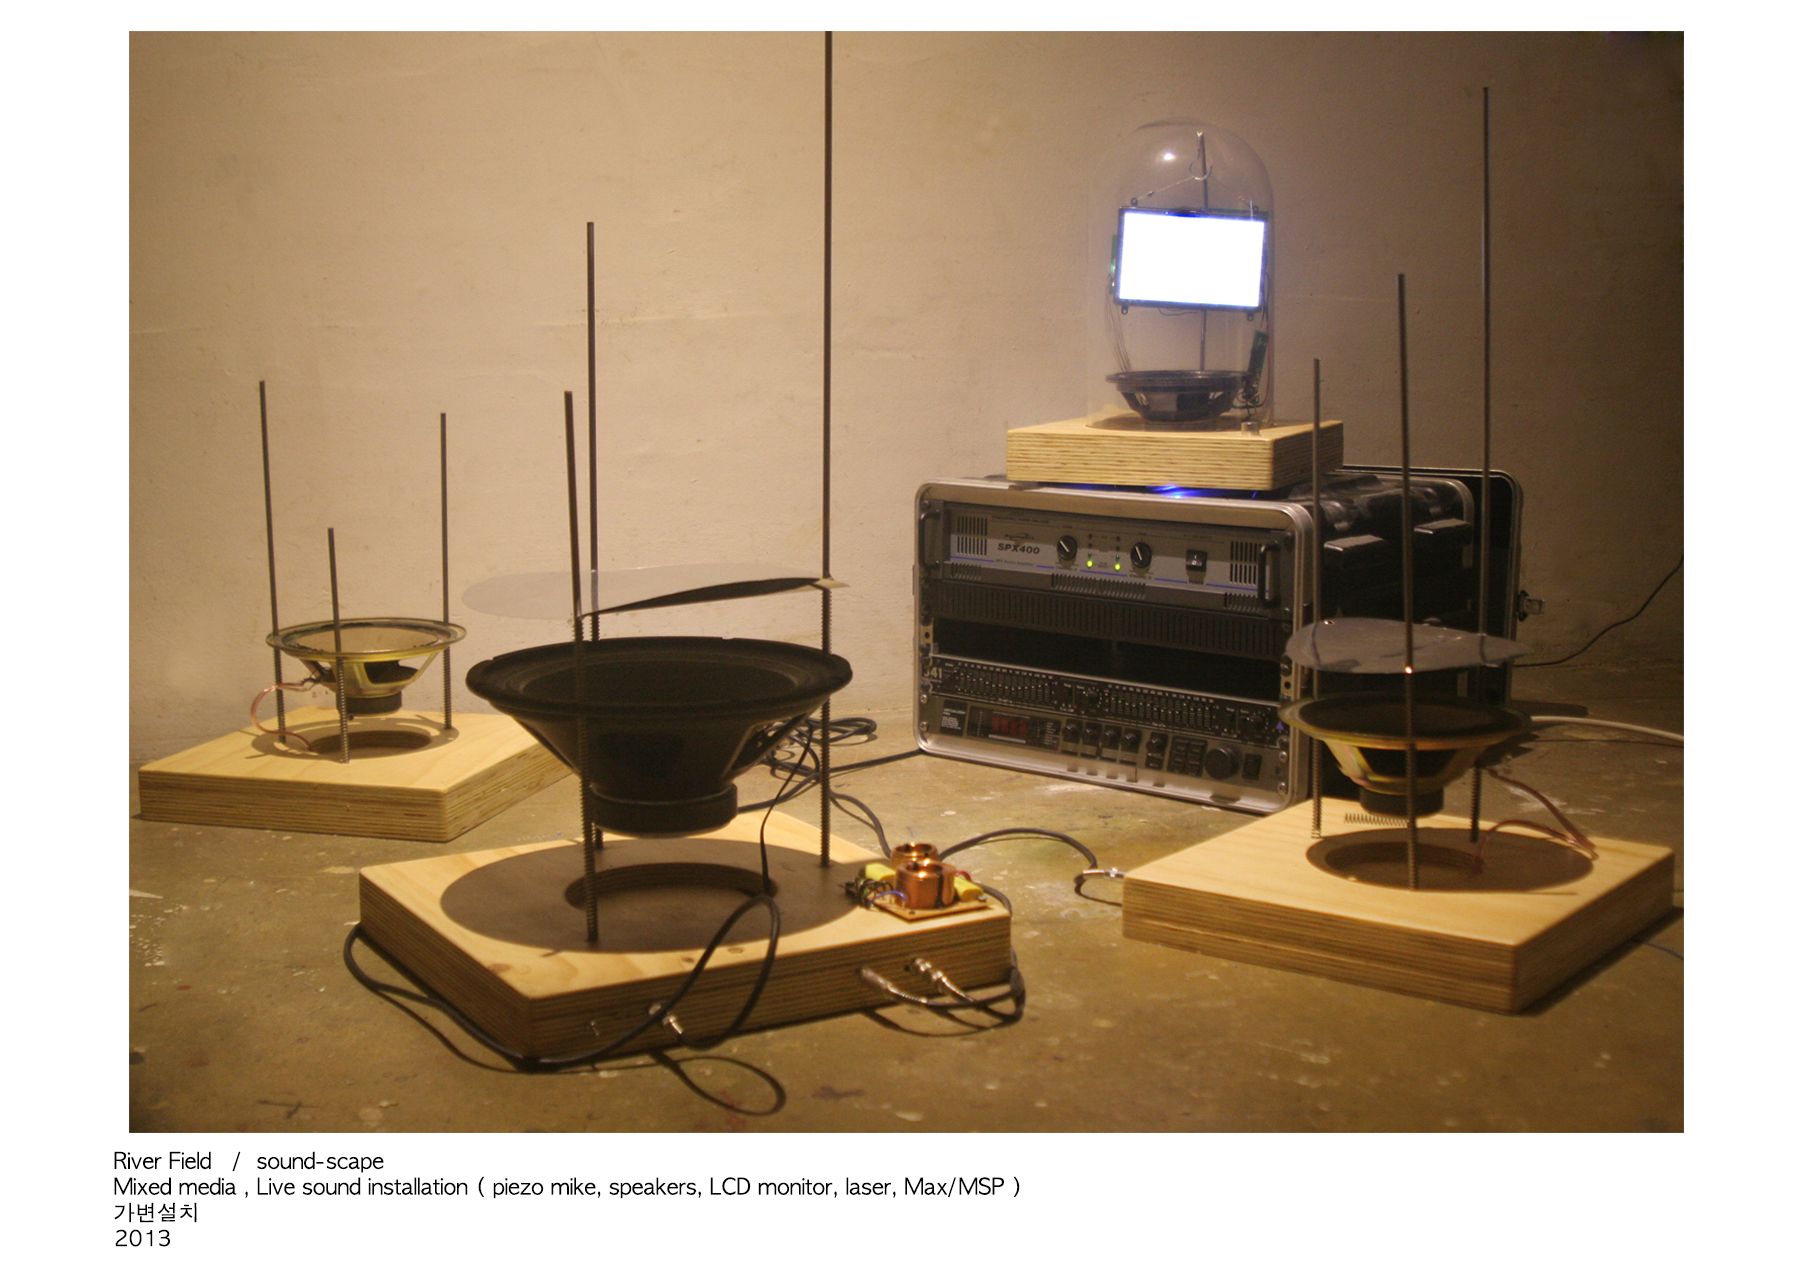 River Field  sound-scape_mixed media, live sound installation(piezo mike, speakers, LCD monitor, laser, MaxMSP)_가변설치_2013